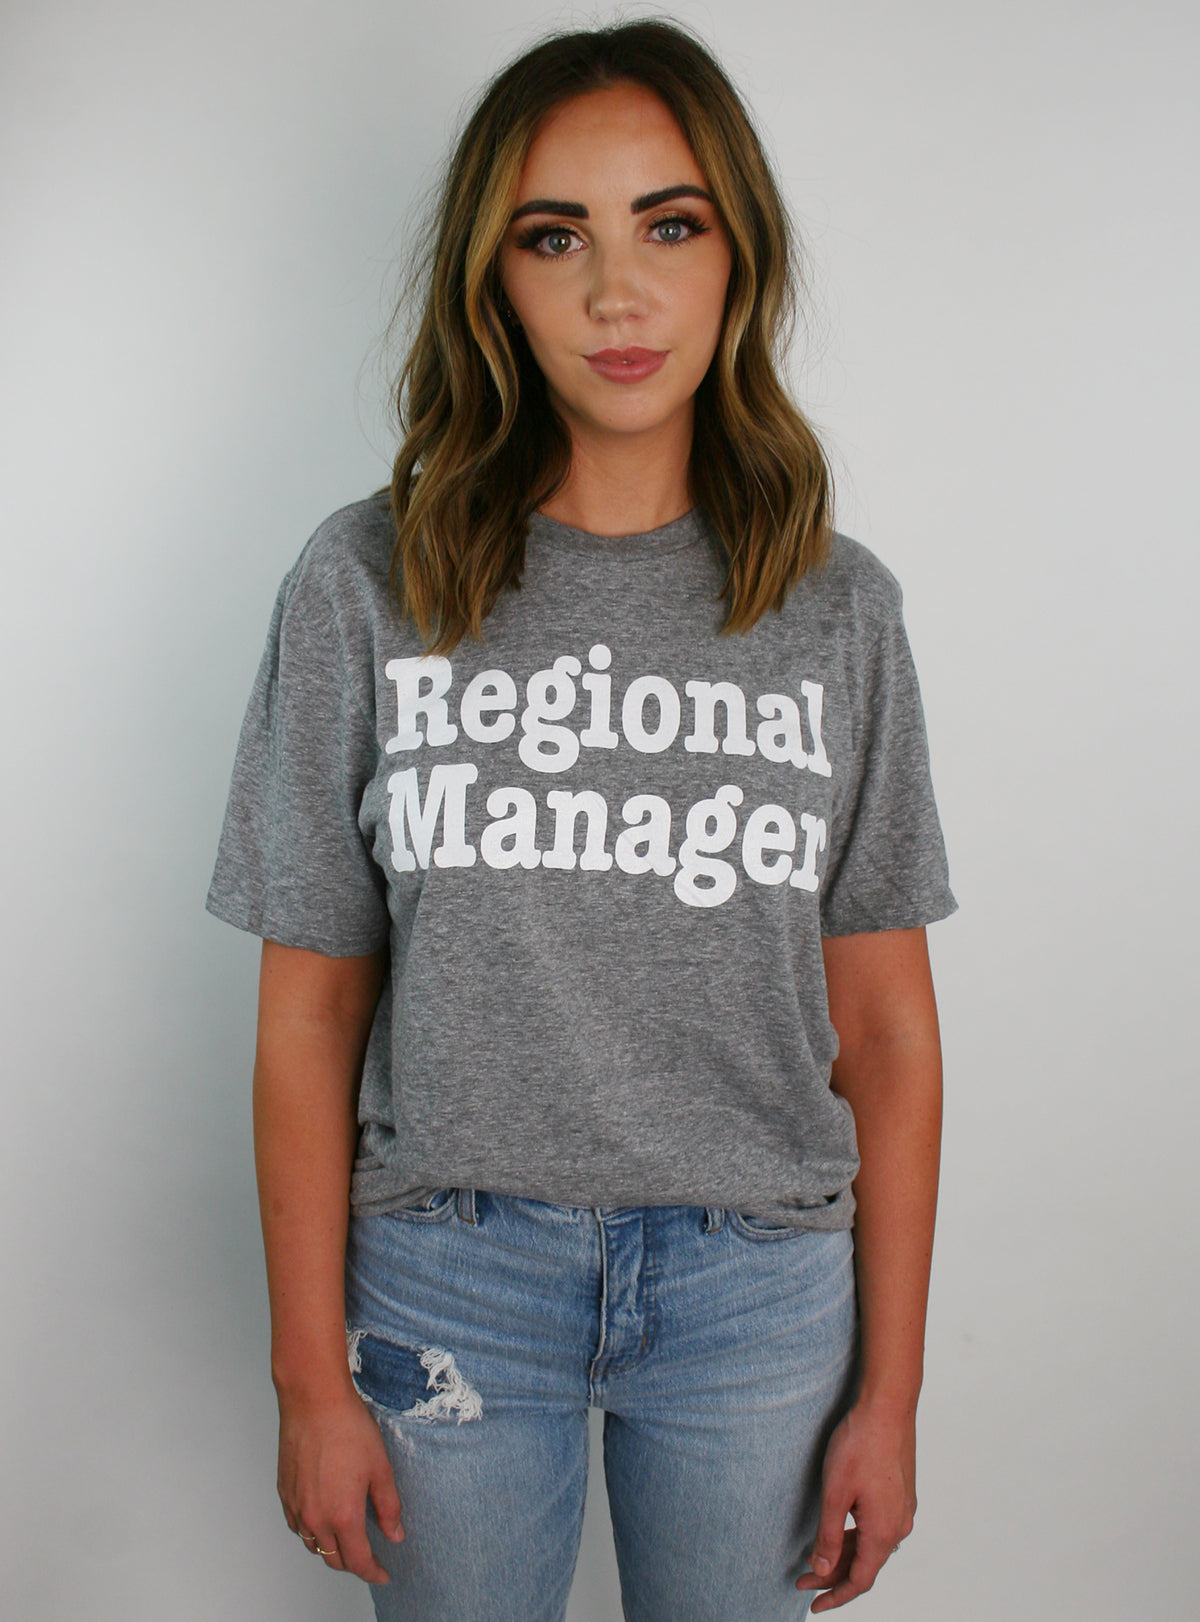 Regional Manager Tee